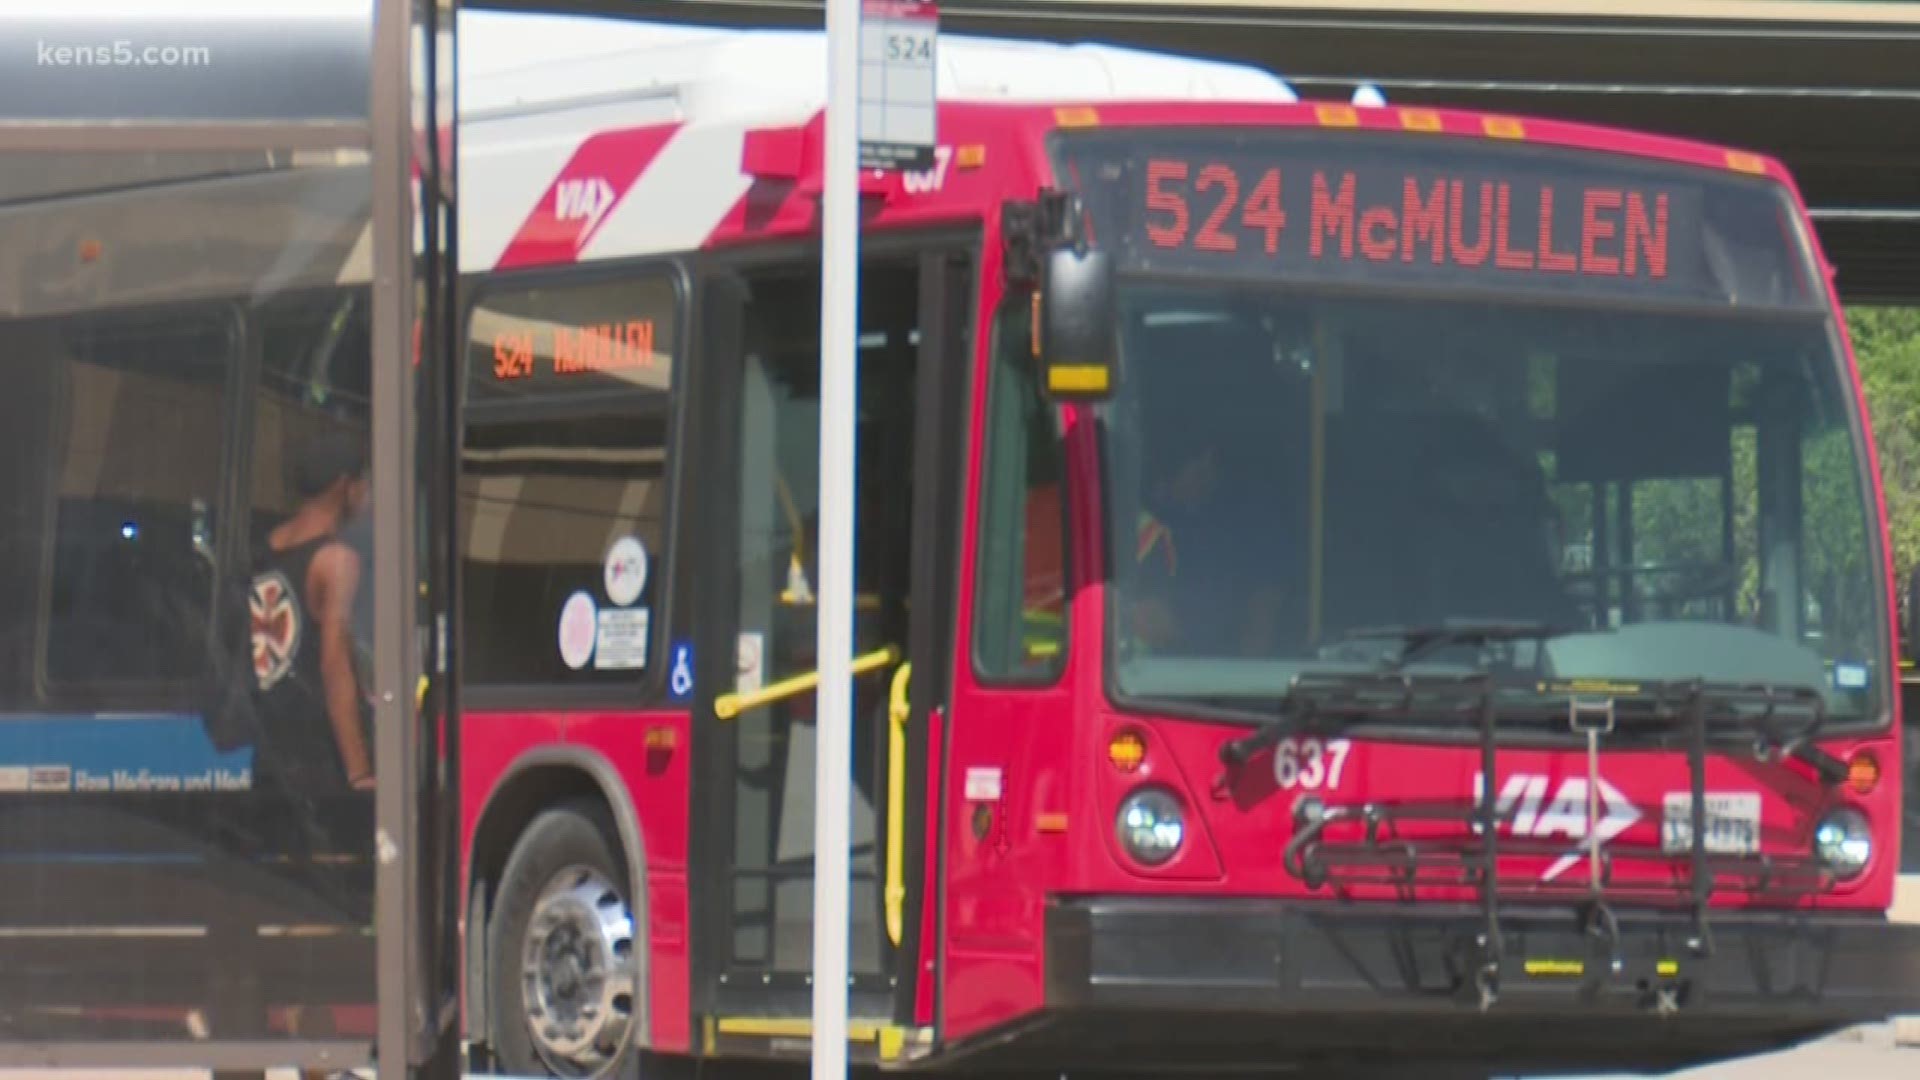 Some people have to be outside while the temperatures are soaring despite the heat advisory in effect. To keep customers safe, VIA Metropolitan Transit is doing a number of things to help beat the heat, as Eyewitness News reporter Sue Calberg explains.